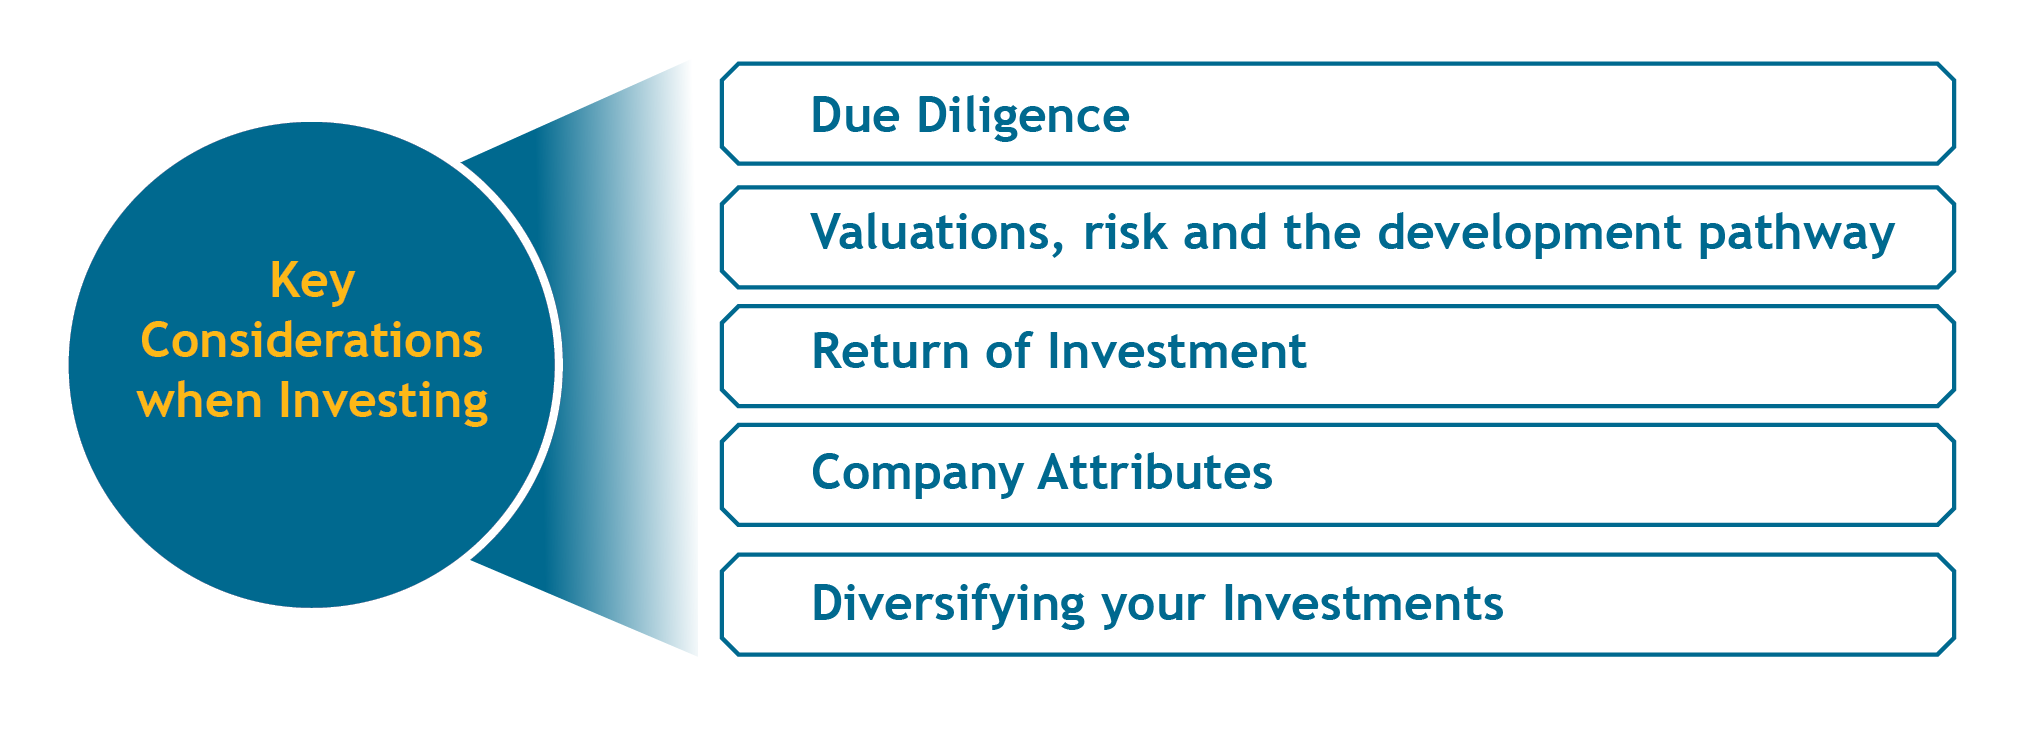 Key considerations when investing